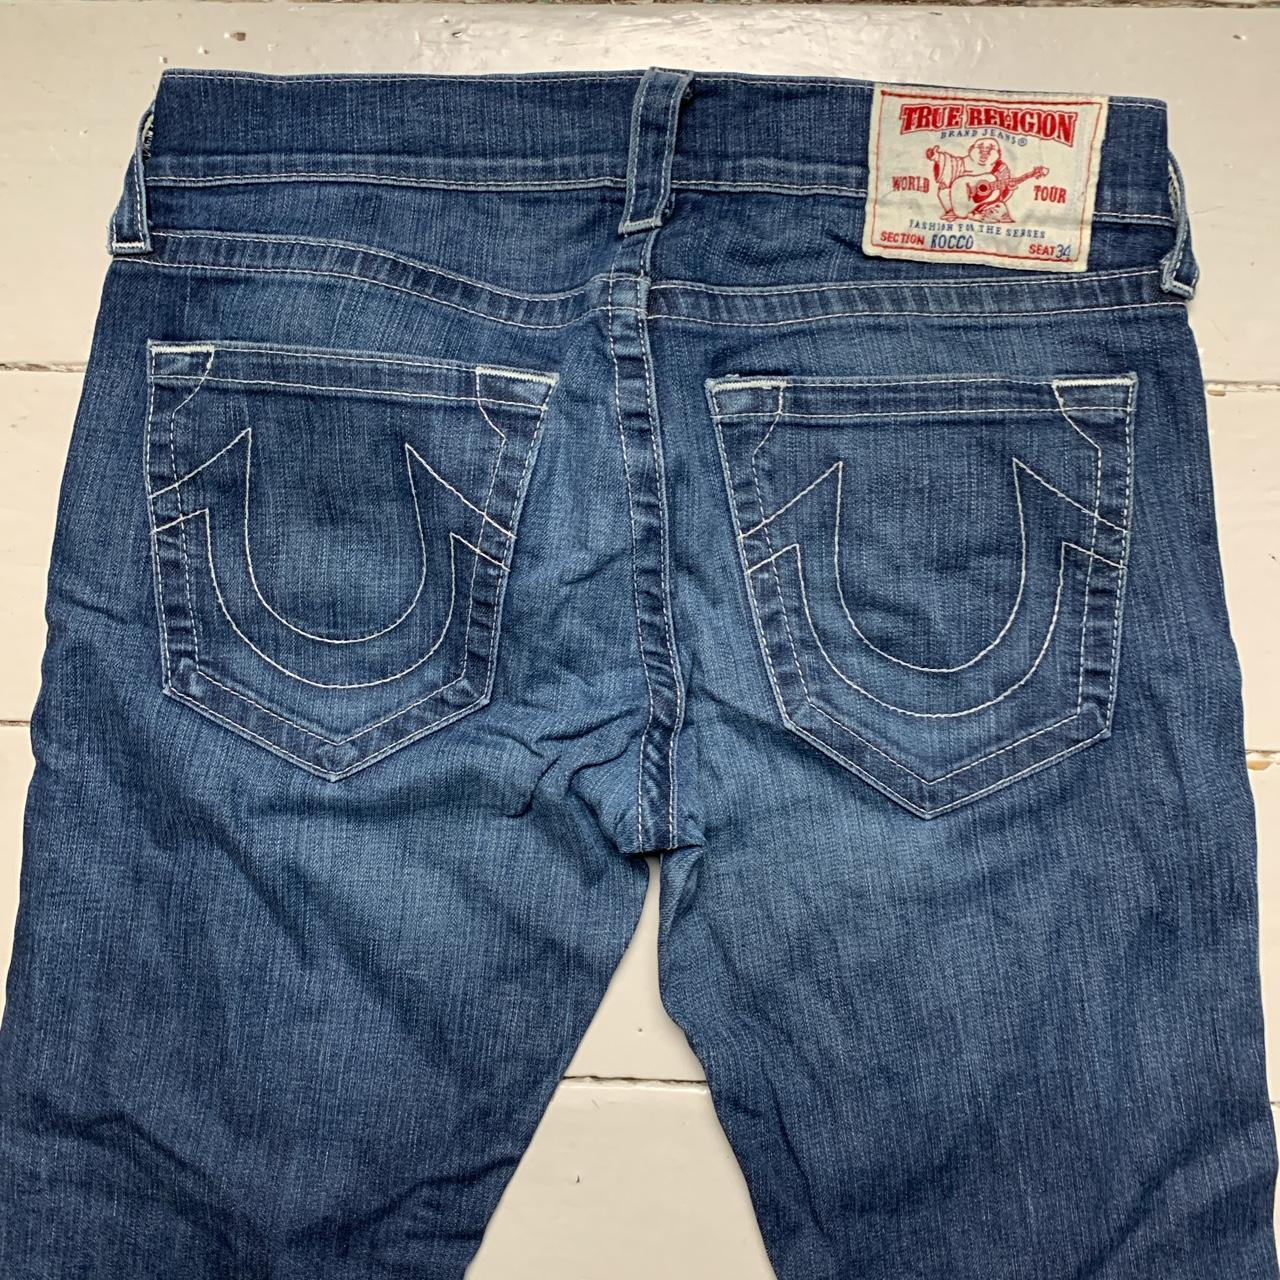 True Religion Rocco Jeans Navy and White Contrast... - Depop